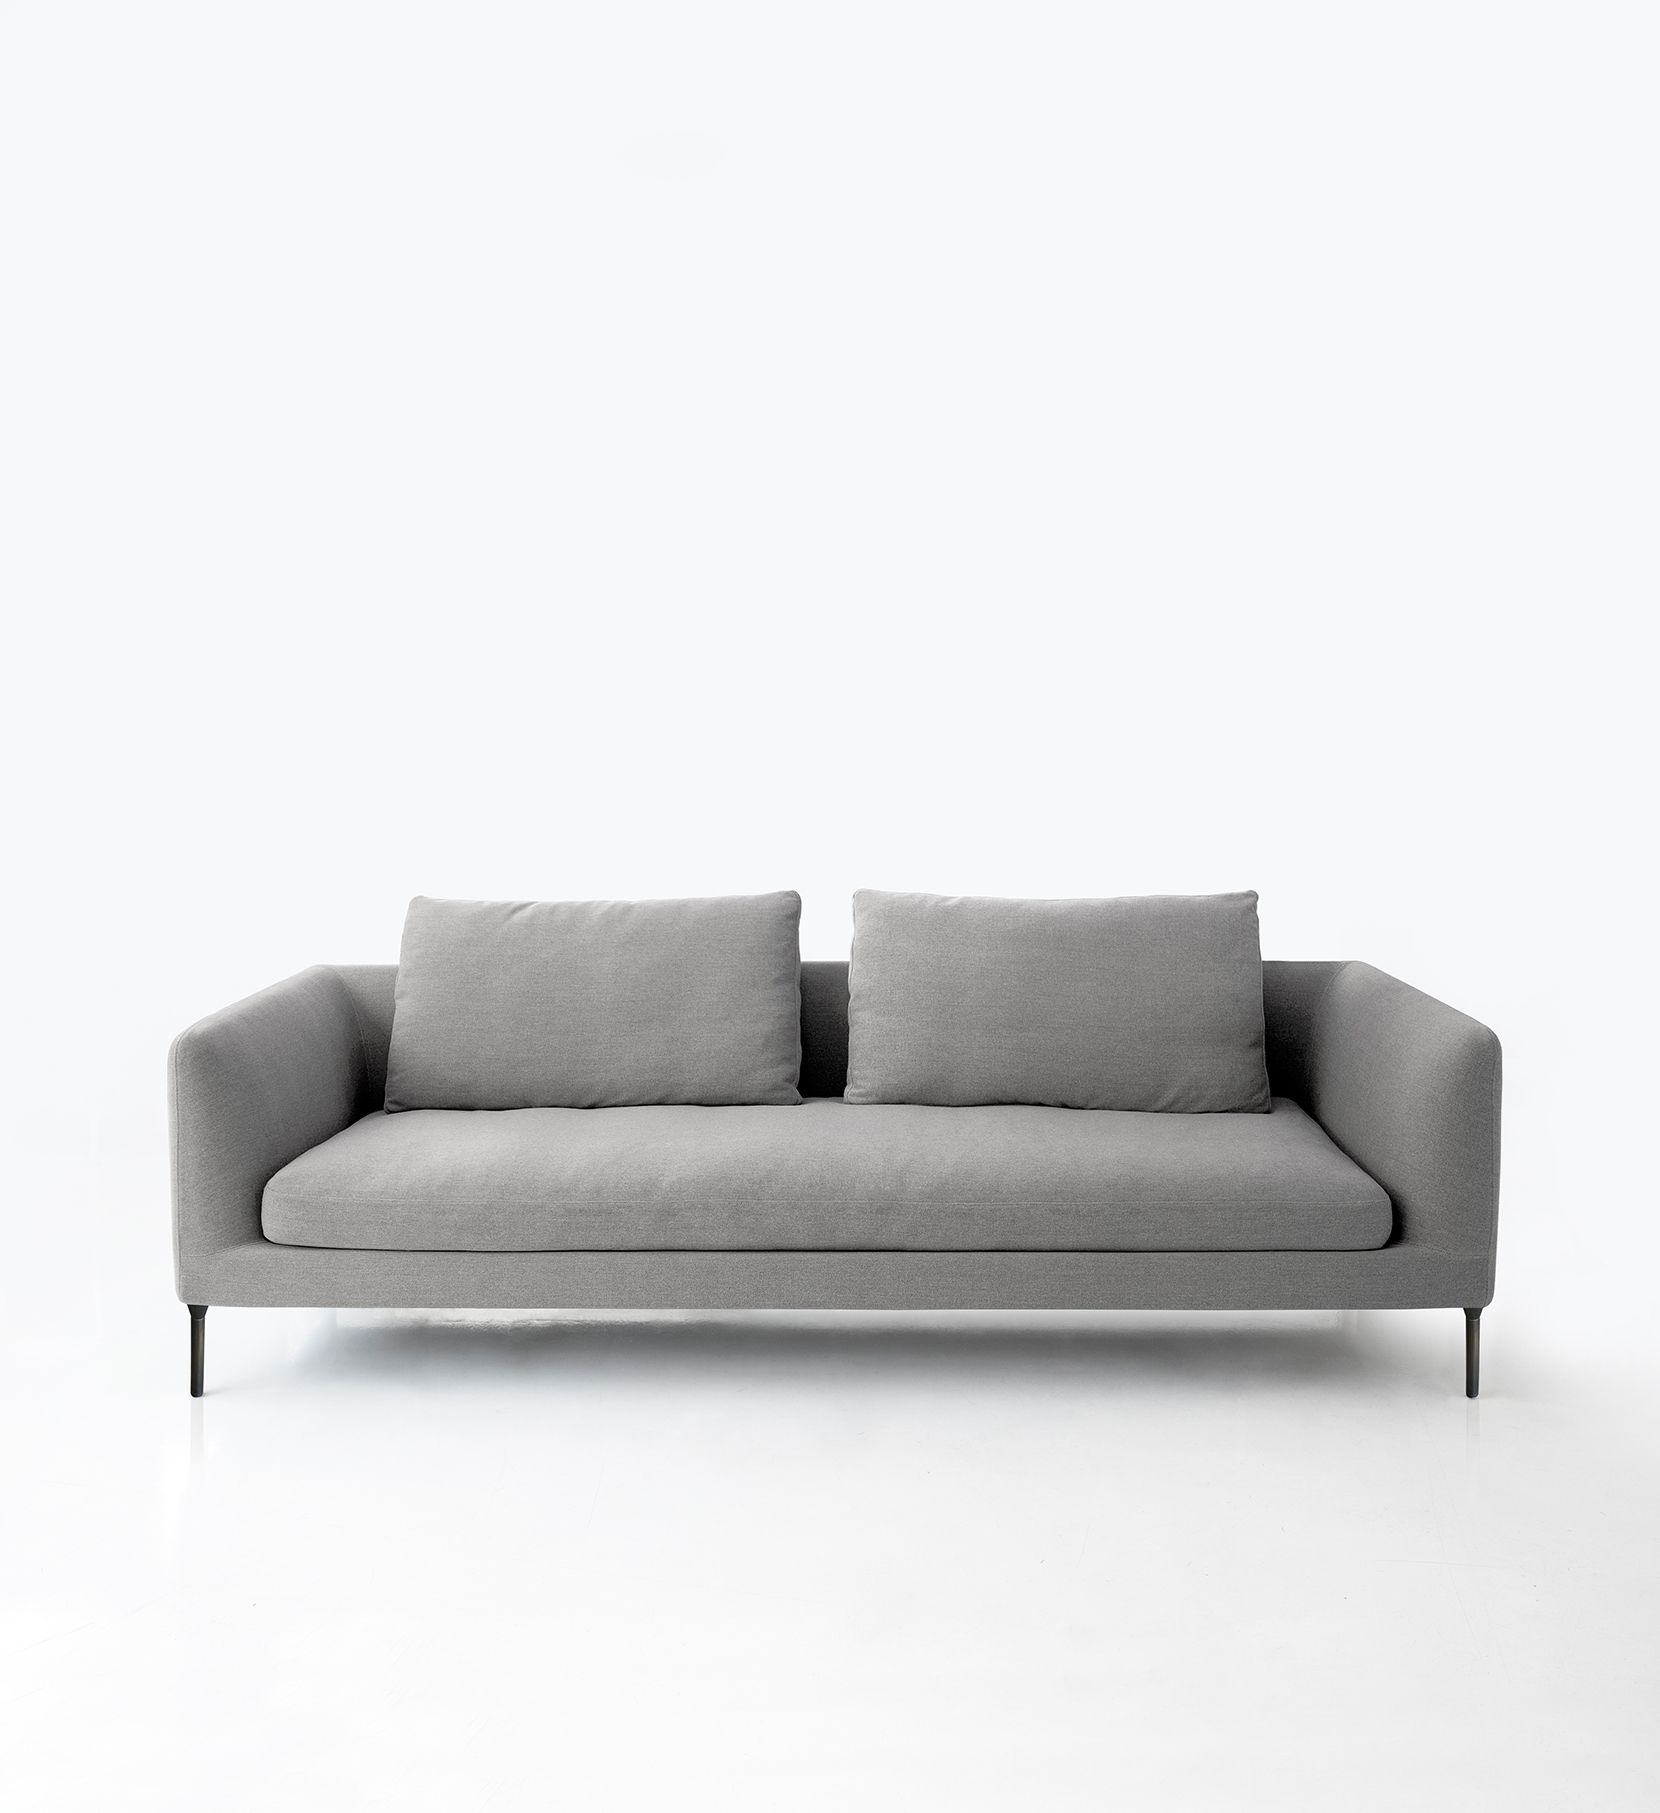 delta-and-delta-sectional